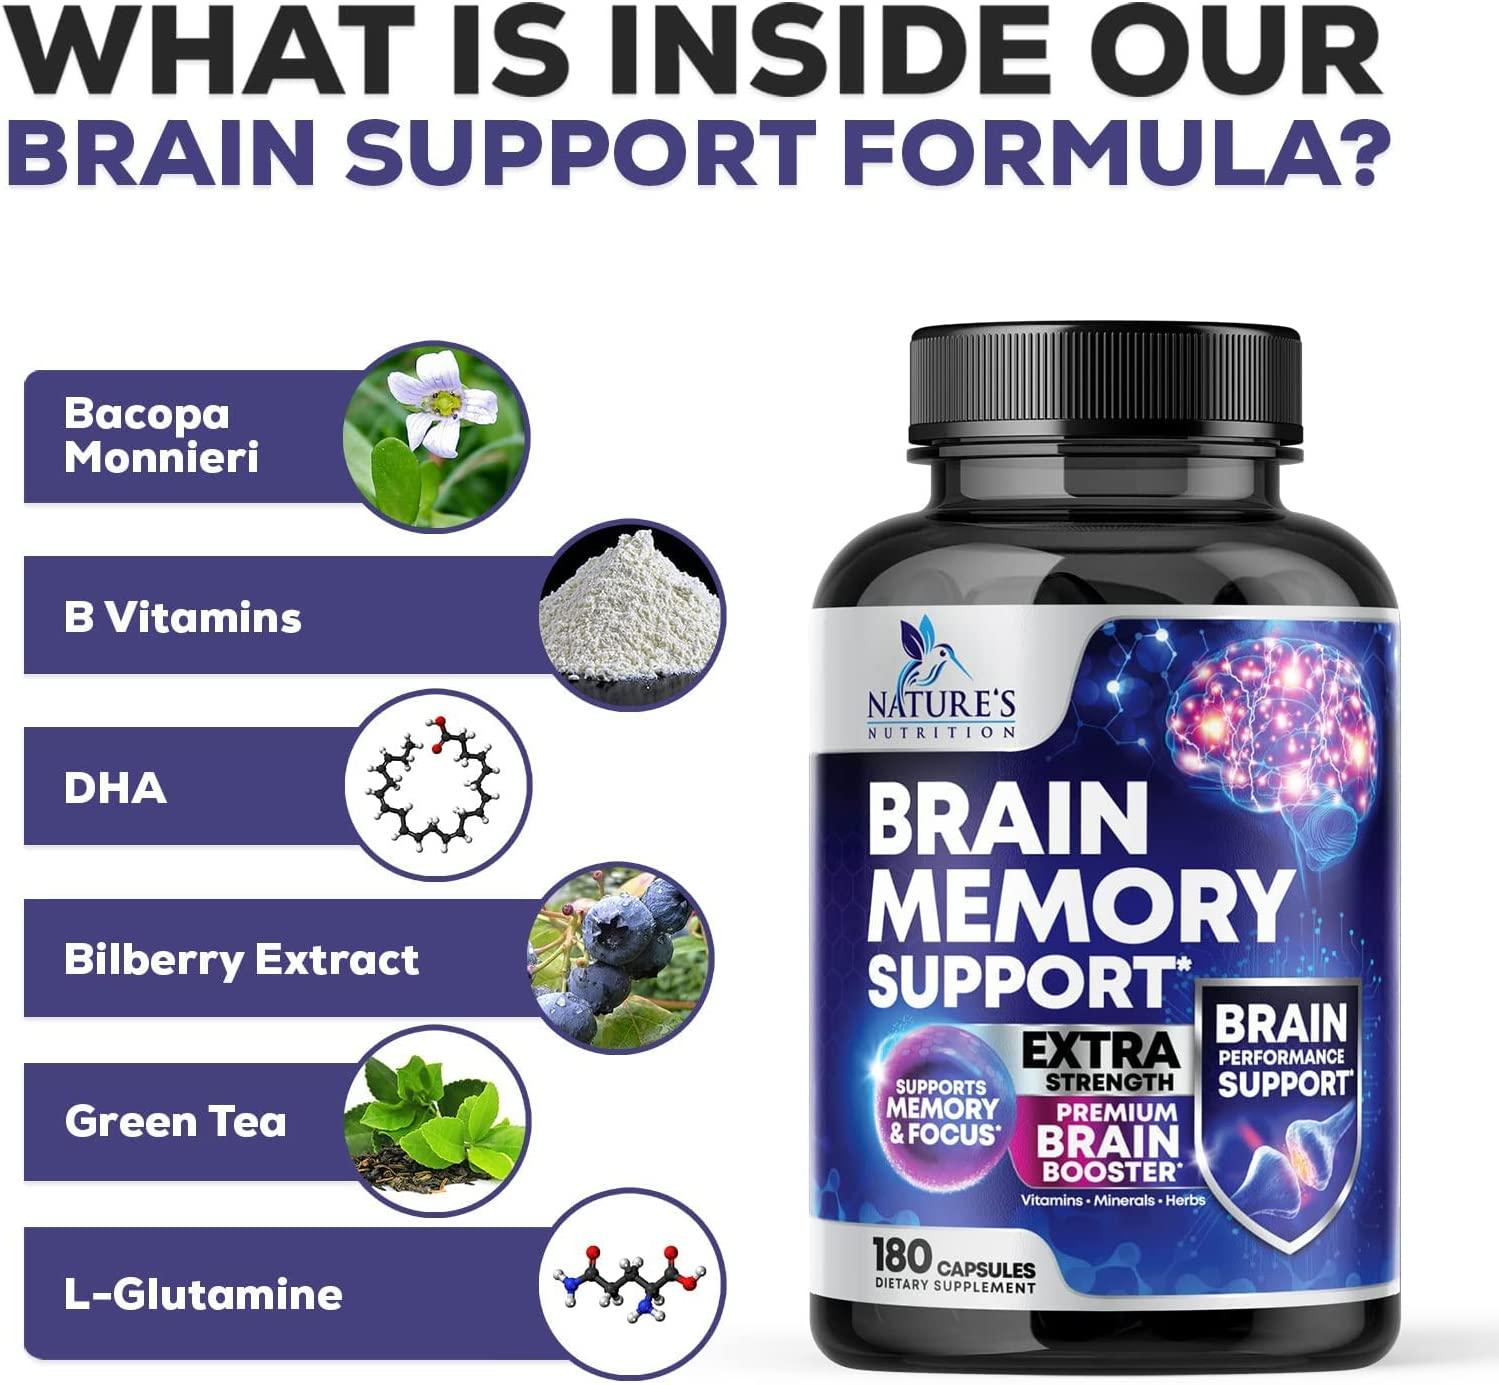 Brain Supplement - Brain Booster to Support Focus, Provide Memory